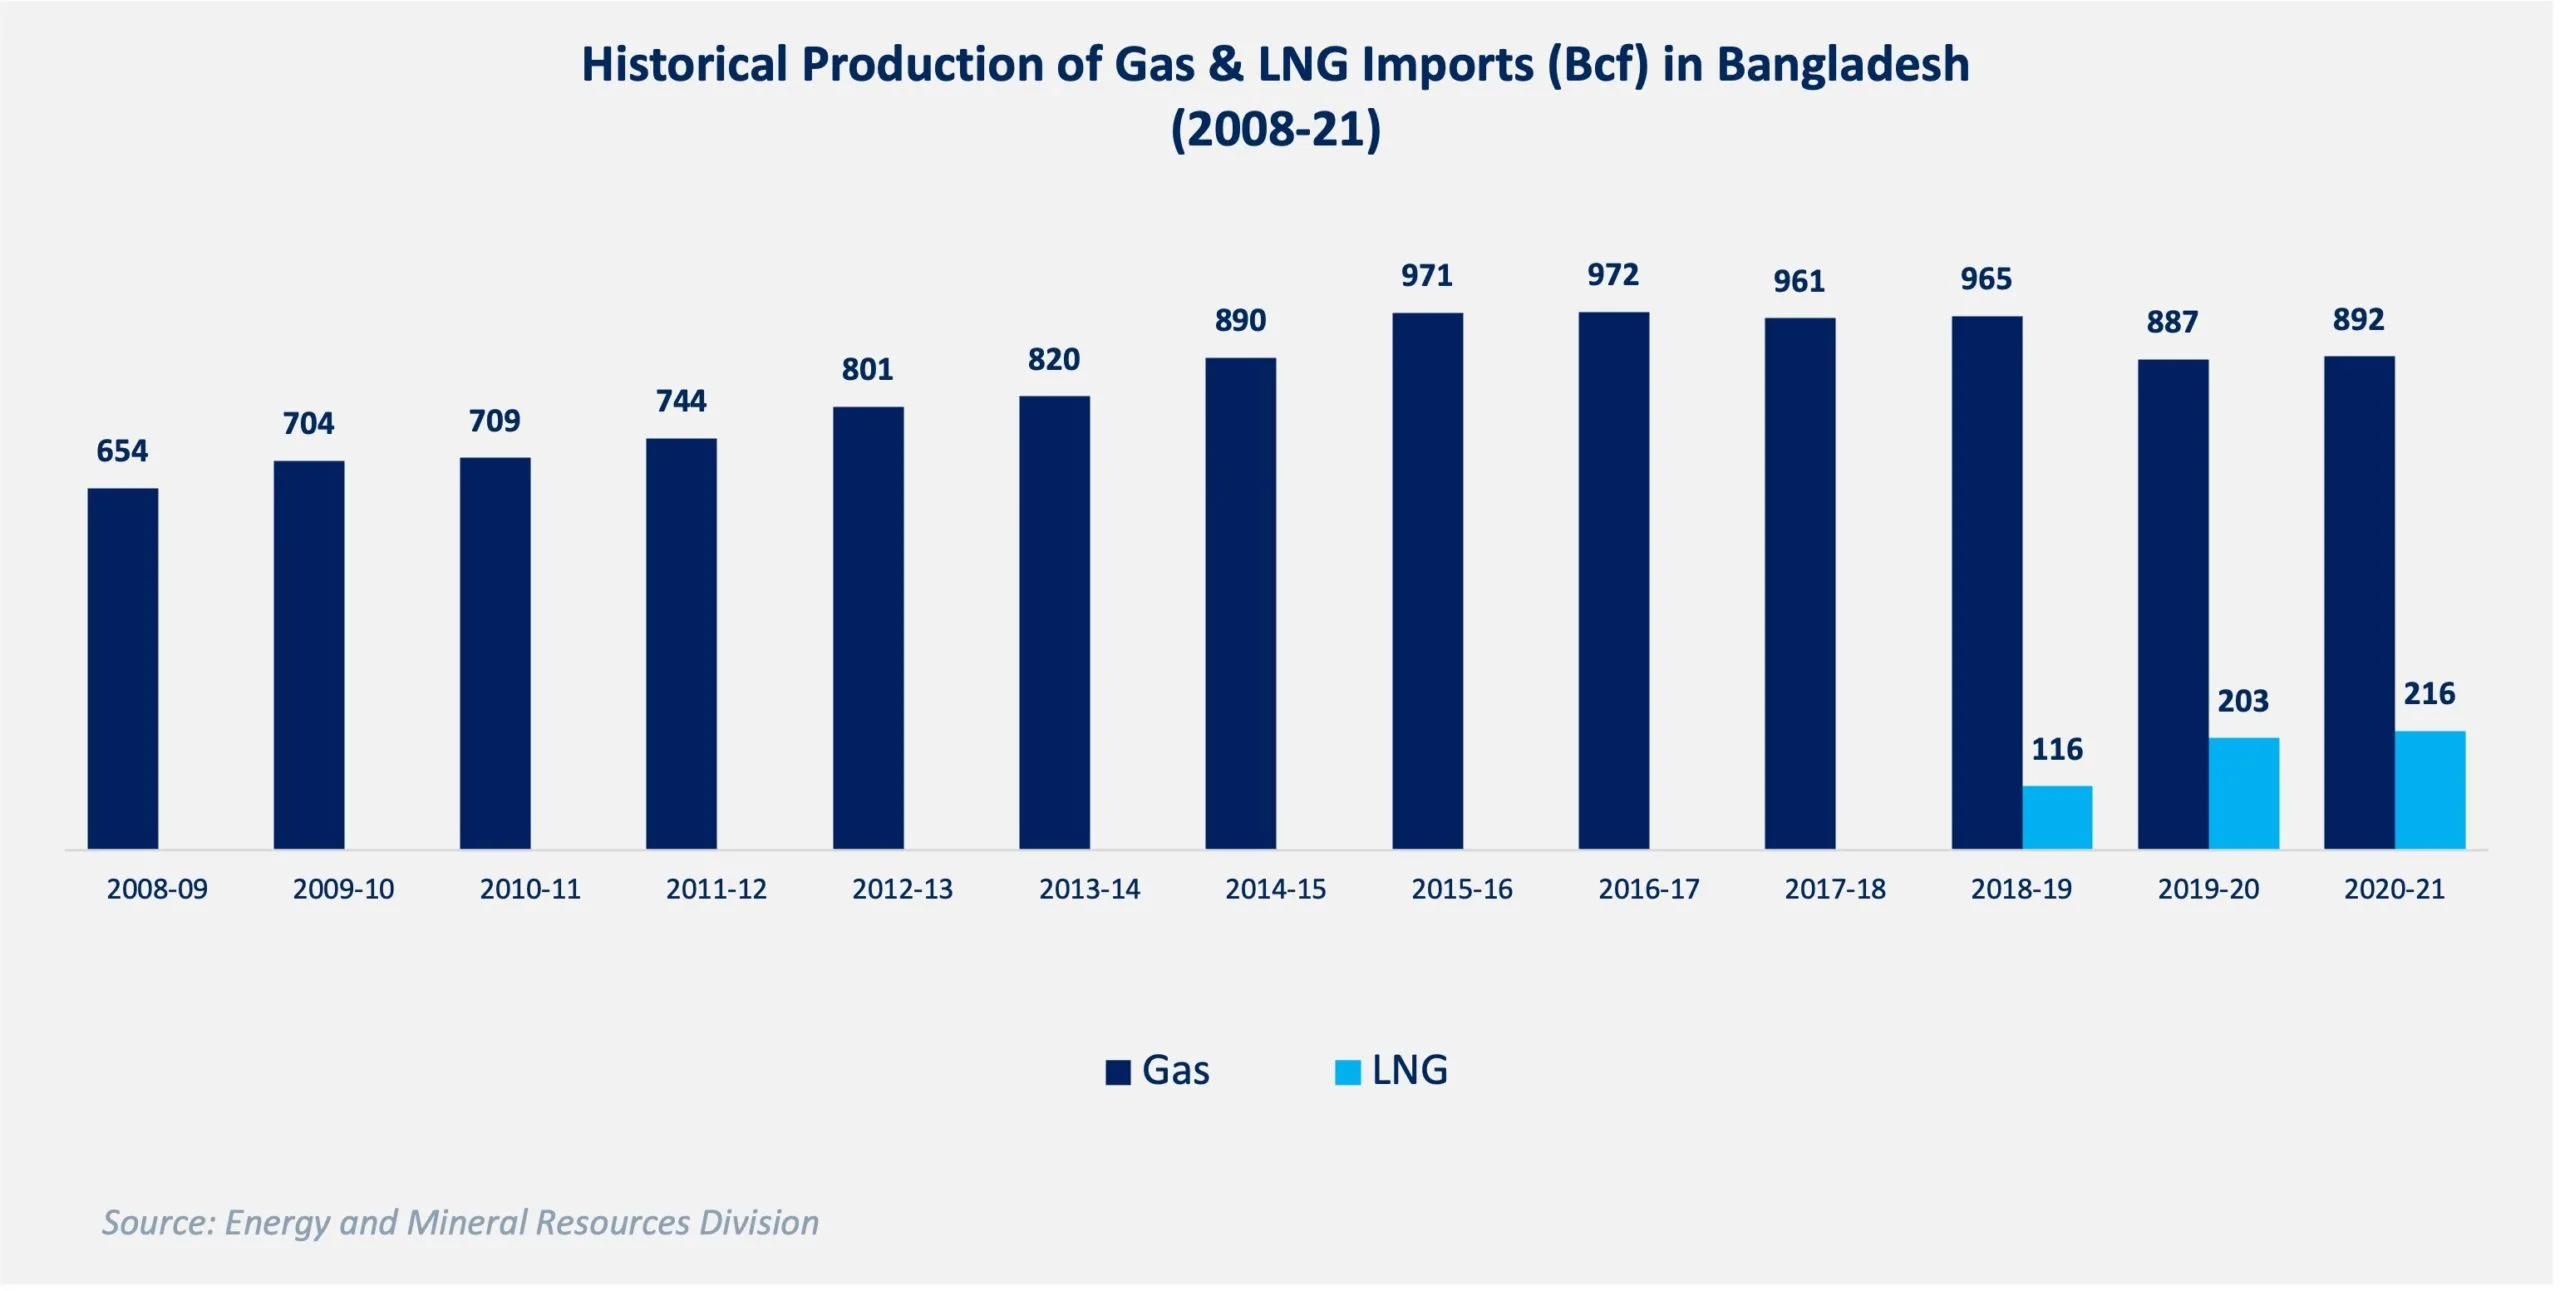 Historical Production of Gas & LNG Imports (Bcf) in Bangladesh (2008-21)